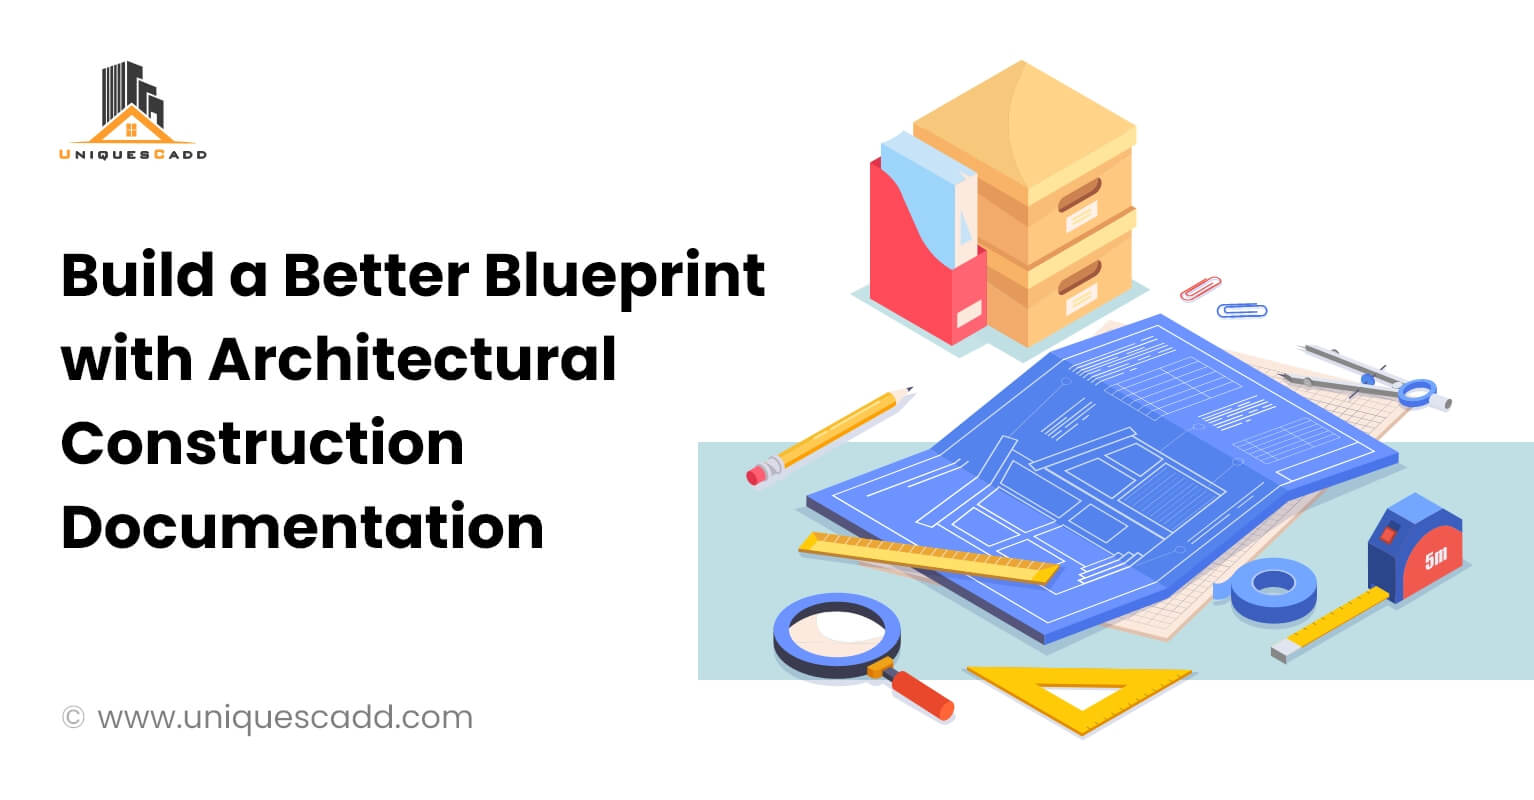 Build a Better Blueprint with Architectural Construction Documentation